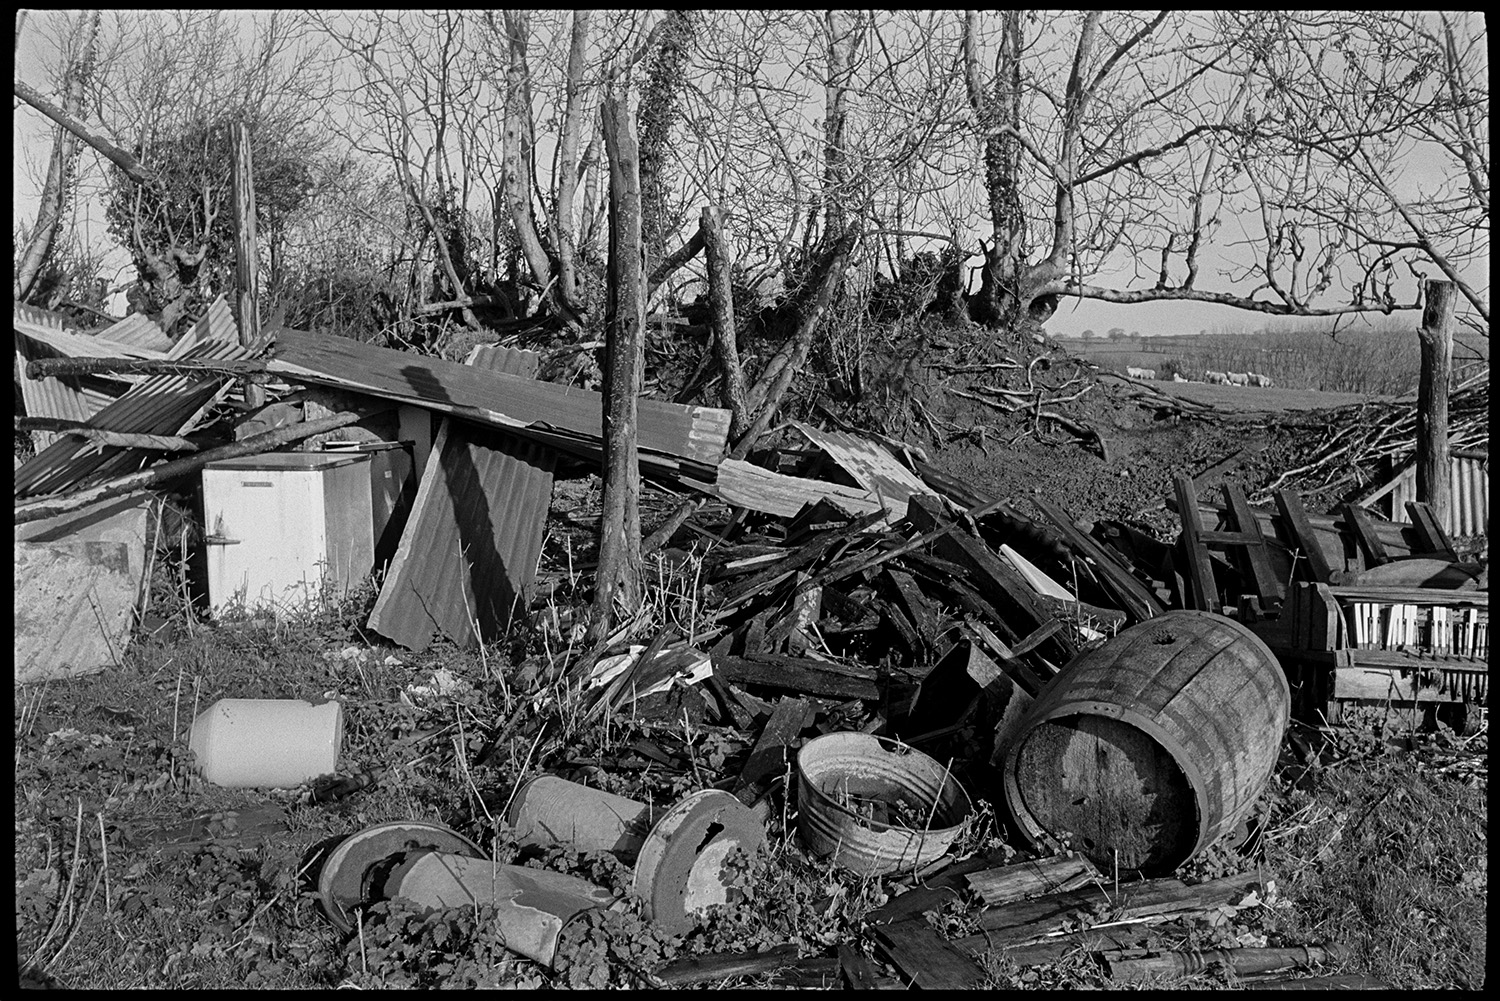 Gnarled tree roots in hedge, overgrown, old corrugated iron.
[A heap of old corrugated iron sheets, an old fridge, a wooden barrel and scrap metal at  Ashwell, Dolton. A hedgerow of ash trees and roots is visible in the background, with some sheep in a field.]